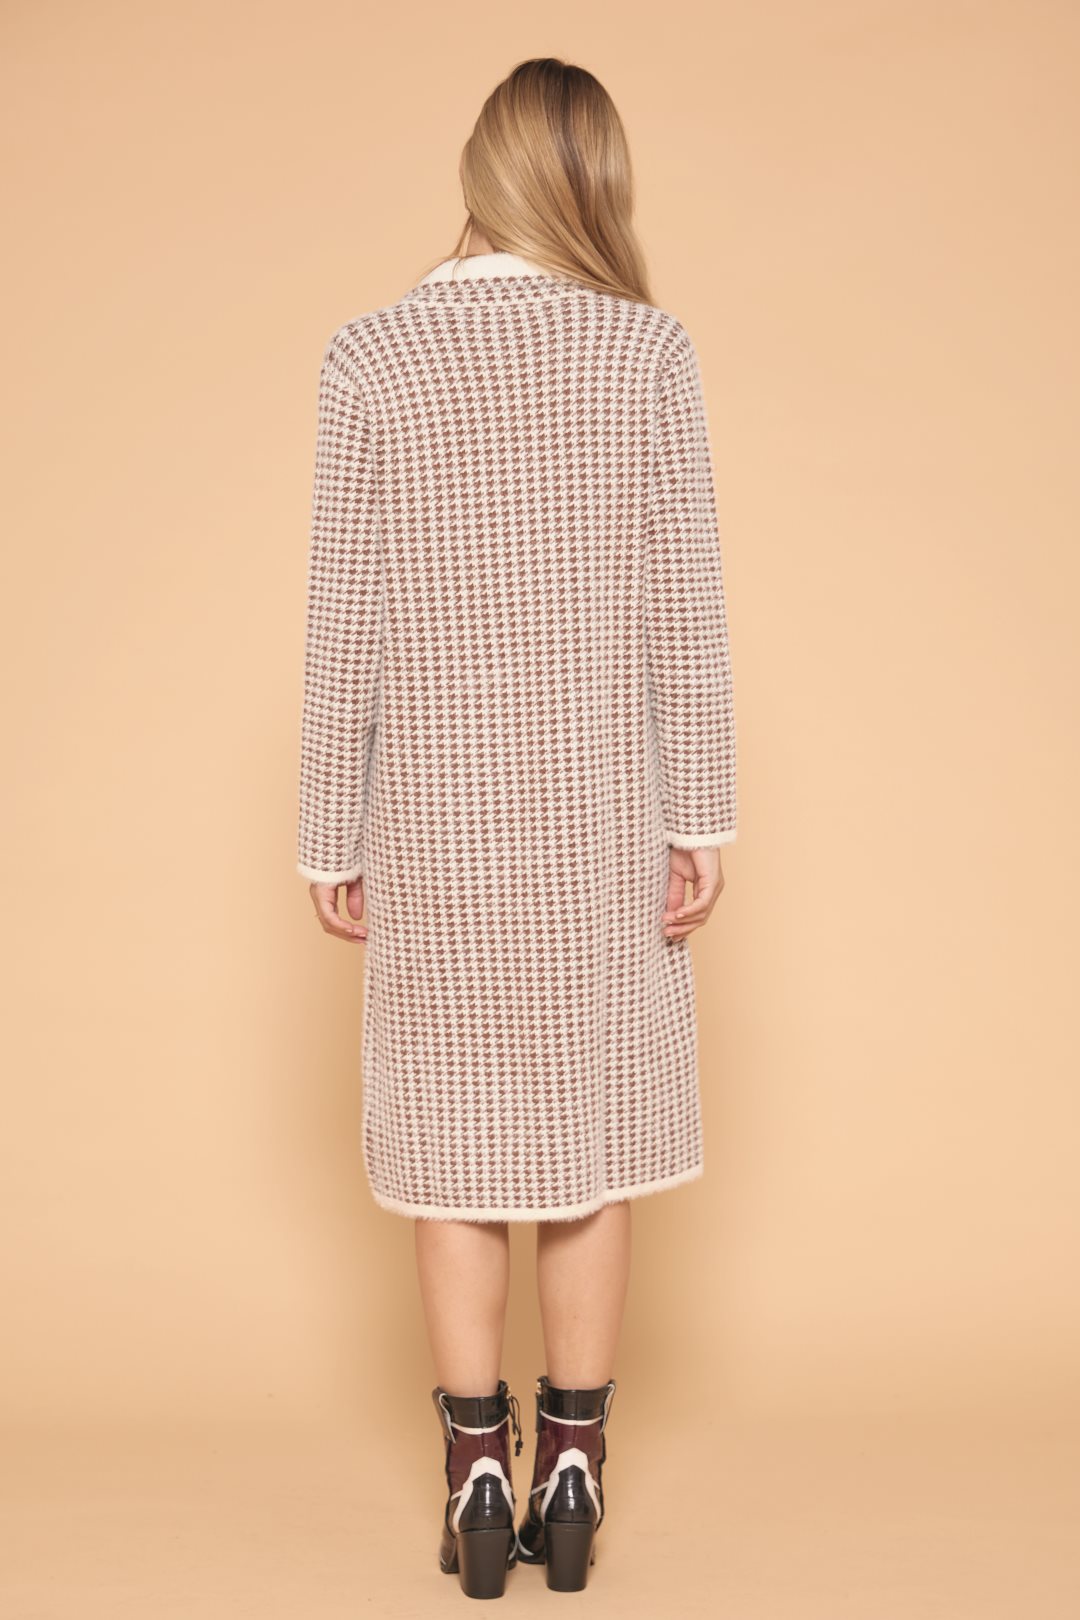 Knit houndstooth coat